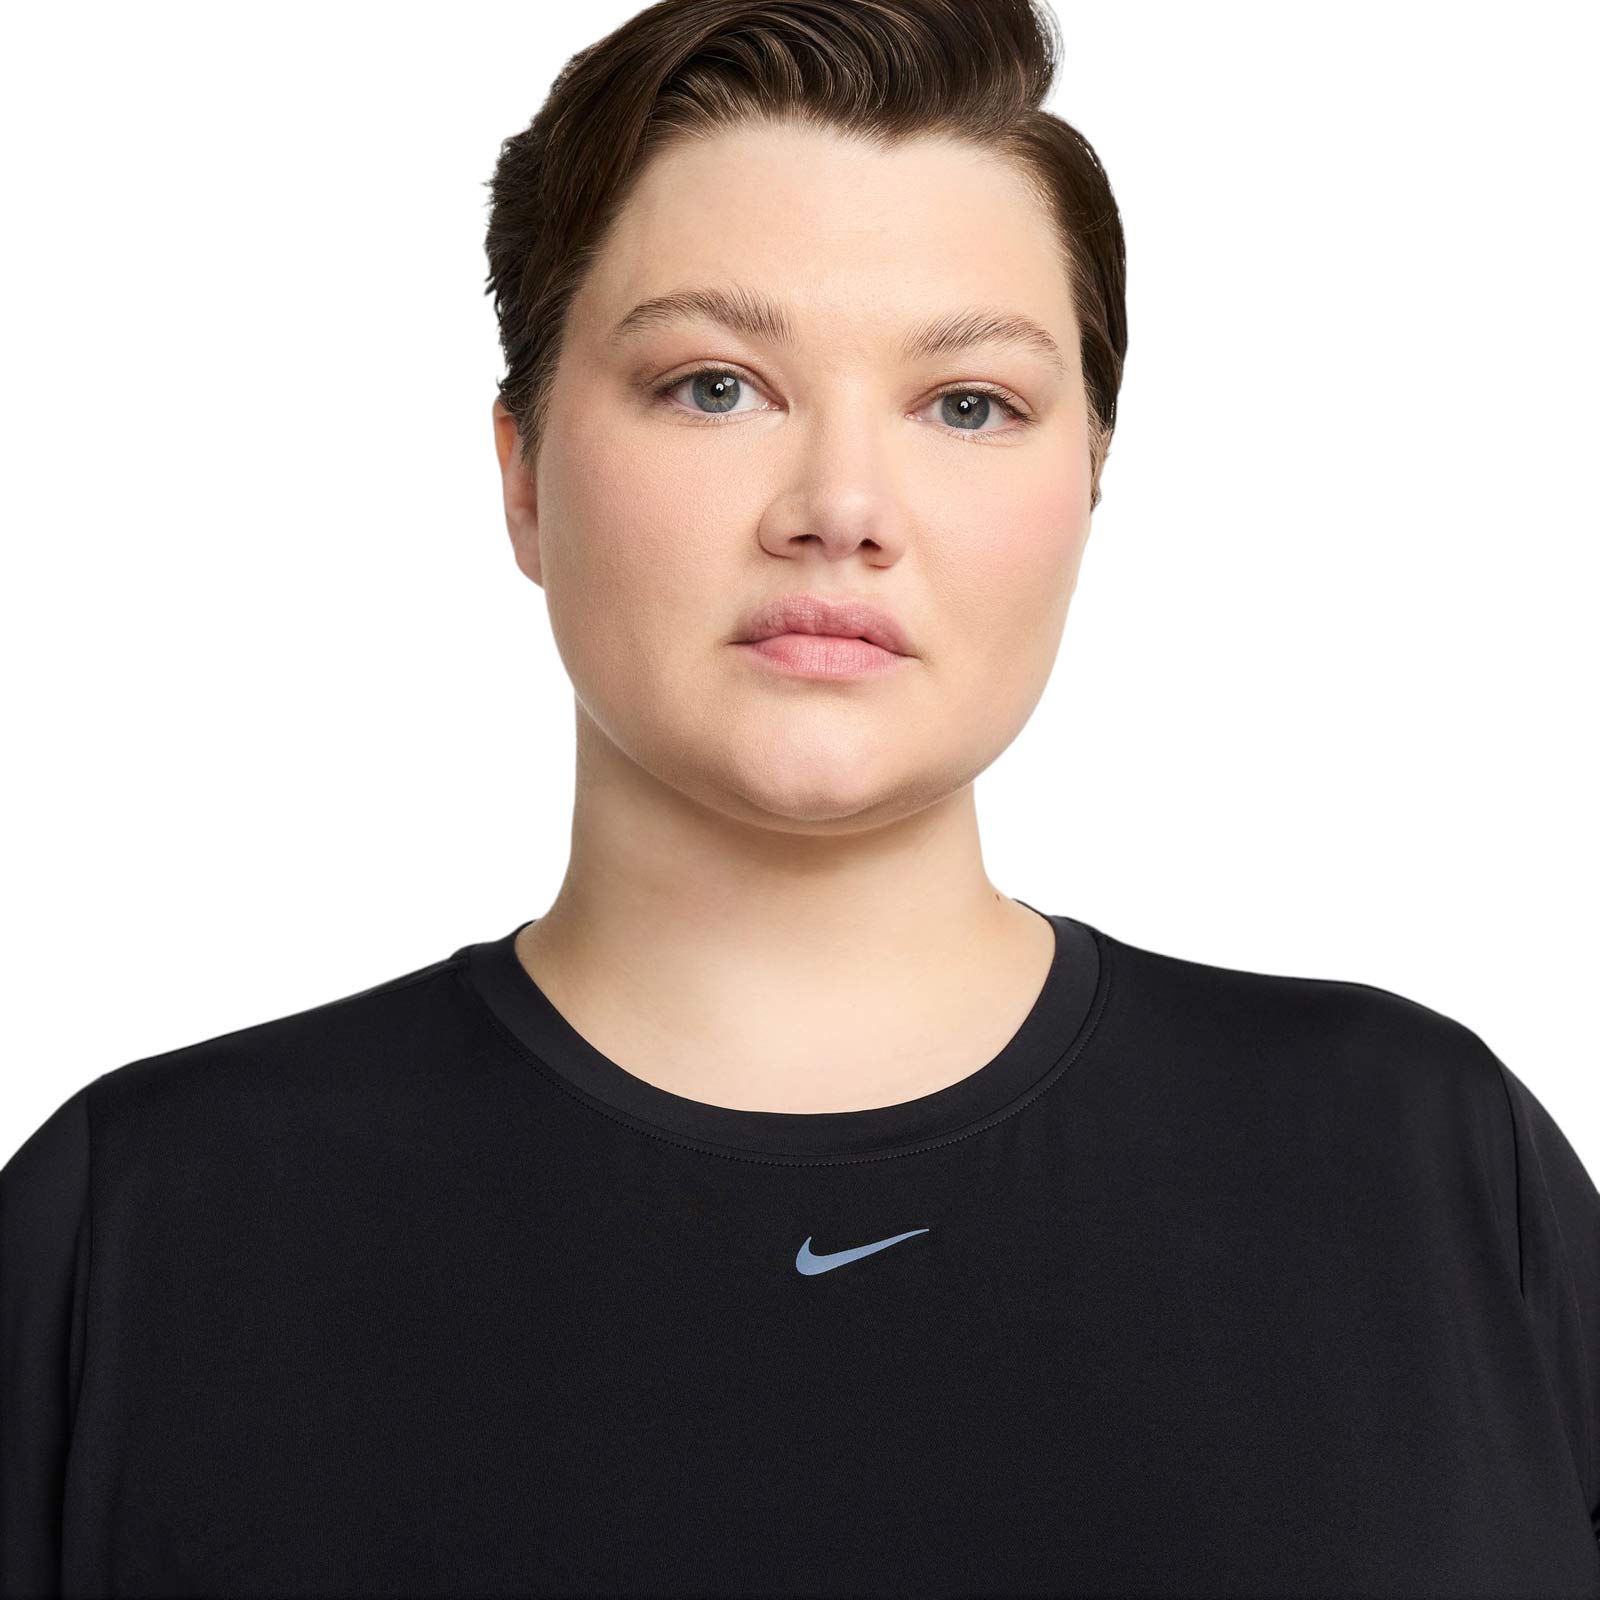 NIKE ONE CLASSIC WOMENS DRI-FIT SHORT-SLEEVE TOP (PLUS SIZE)